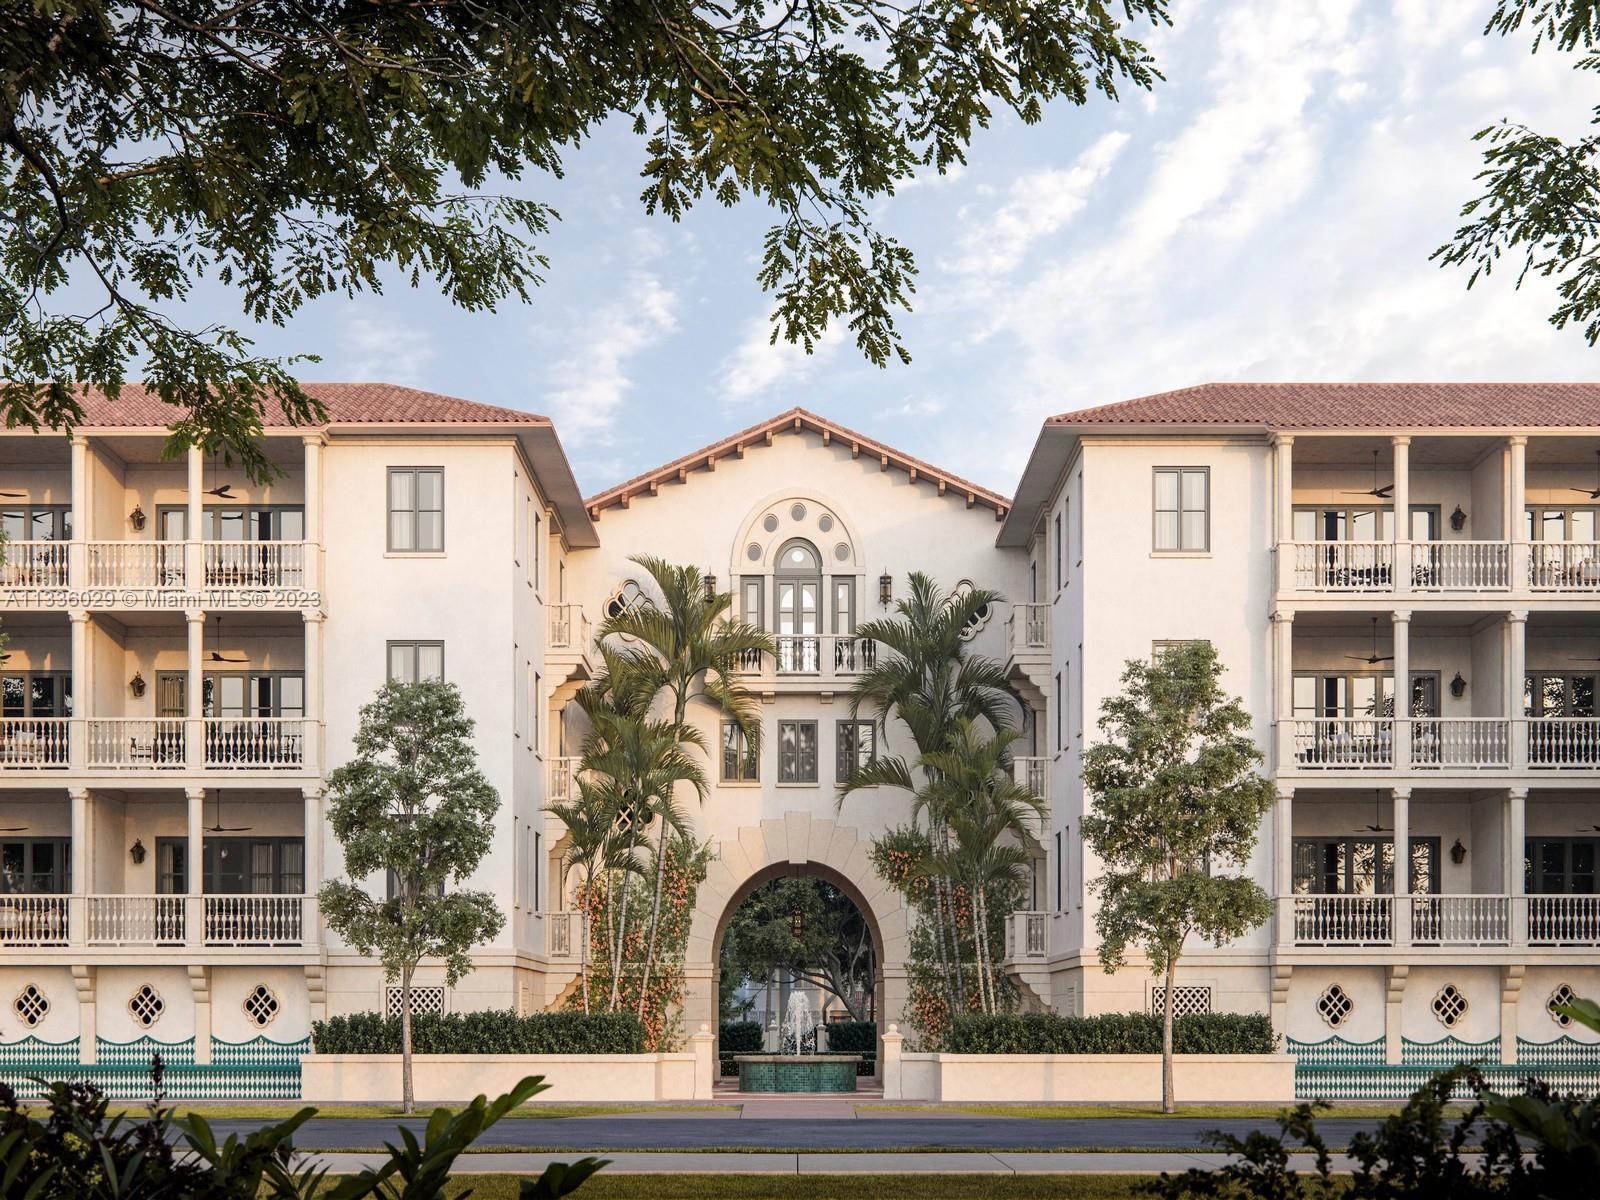 Introducing the Flats at Coral Gables most exclusive new Village known as "The Village at Coral Gables." Inspired by 19th Century Spanish- Colonial architecture with a beautifully functional and modern interior floor plan. Featuring 2 bedrooms 2.5 baths + Den, and private and spacious covered  loggias with gorgeous balconies reminiscent of a noble Spanish-colonial facade. Nestled in the heart of  The City Beautiful with easy european pedestrian living in a quiet residential neighborhood with walking distance to golf courses, fine shopping and dining and business district. "The Village at Coral Gables" is expressed through a delighful variety of garden spaces, lush green avenues, plazas, walkways, fountains and state of the art amenities for residents to revel in